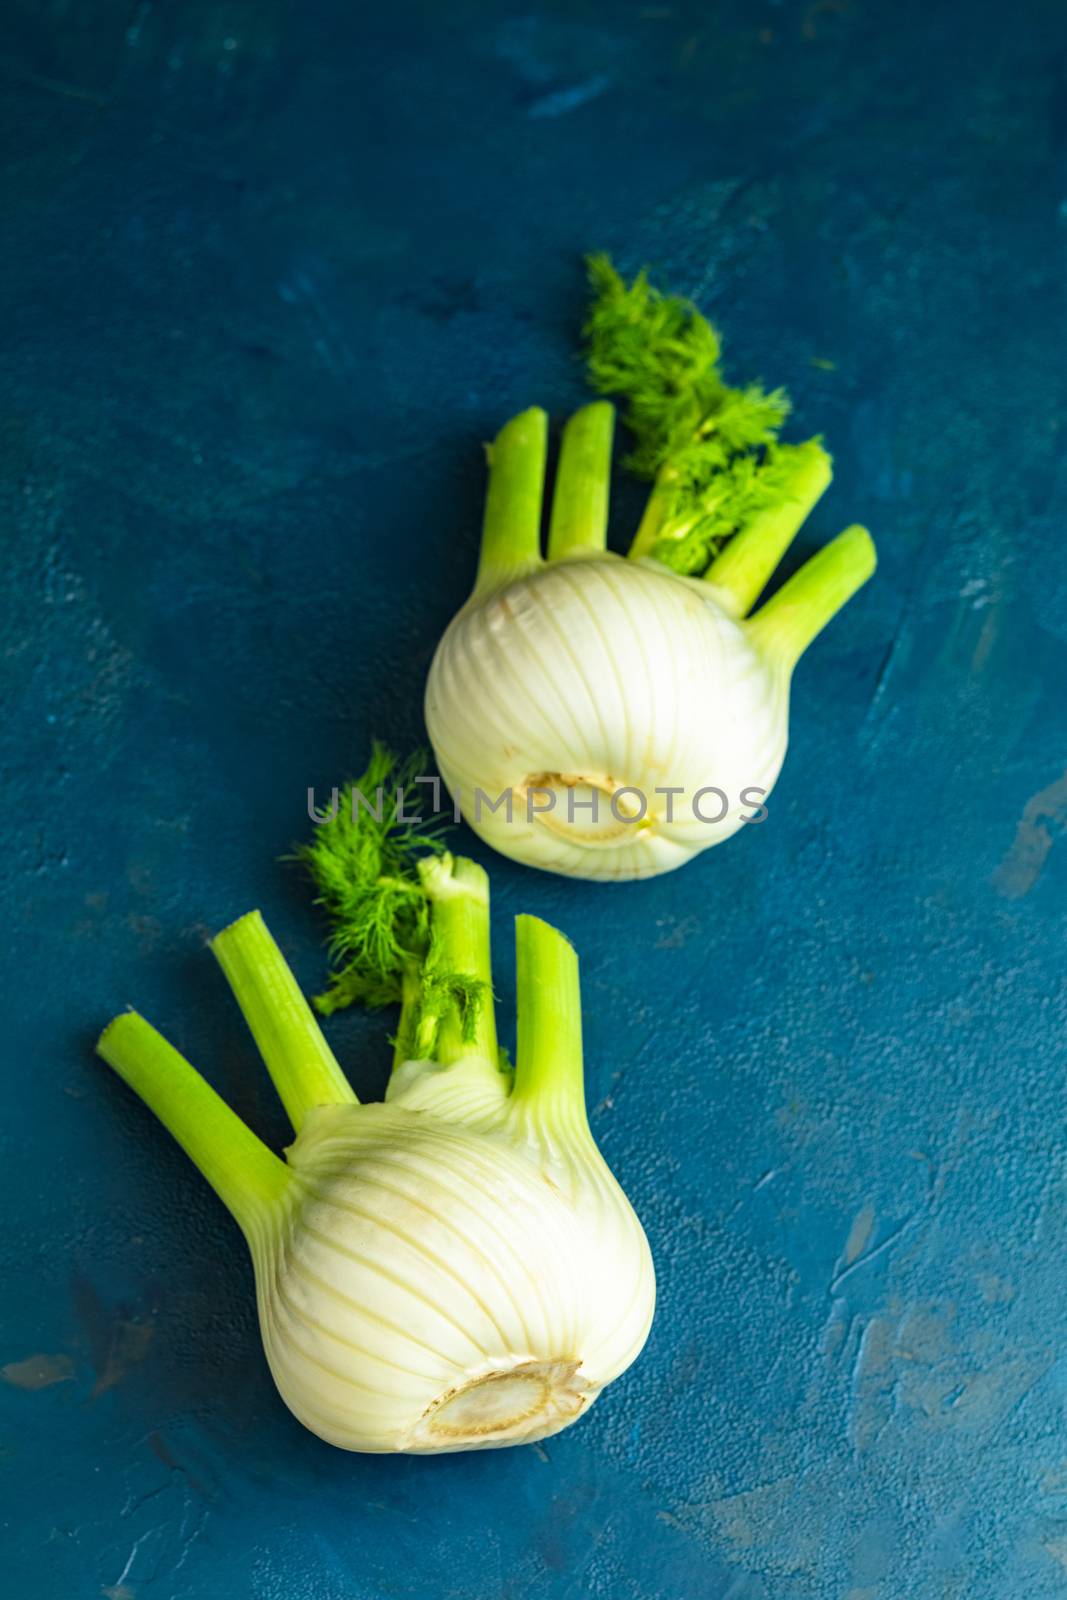 Fresh Florence fennel bulbs or Fennel bulb on dark blue concrete background. Healthy and benefits of Florence fennel bulbs.